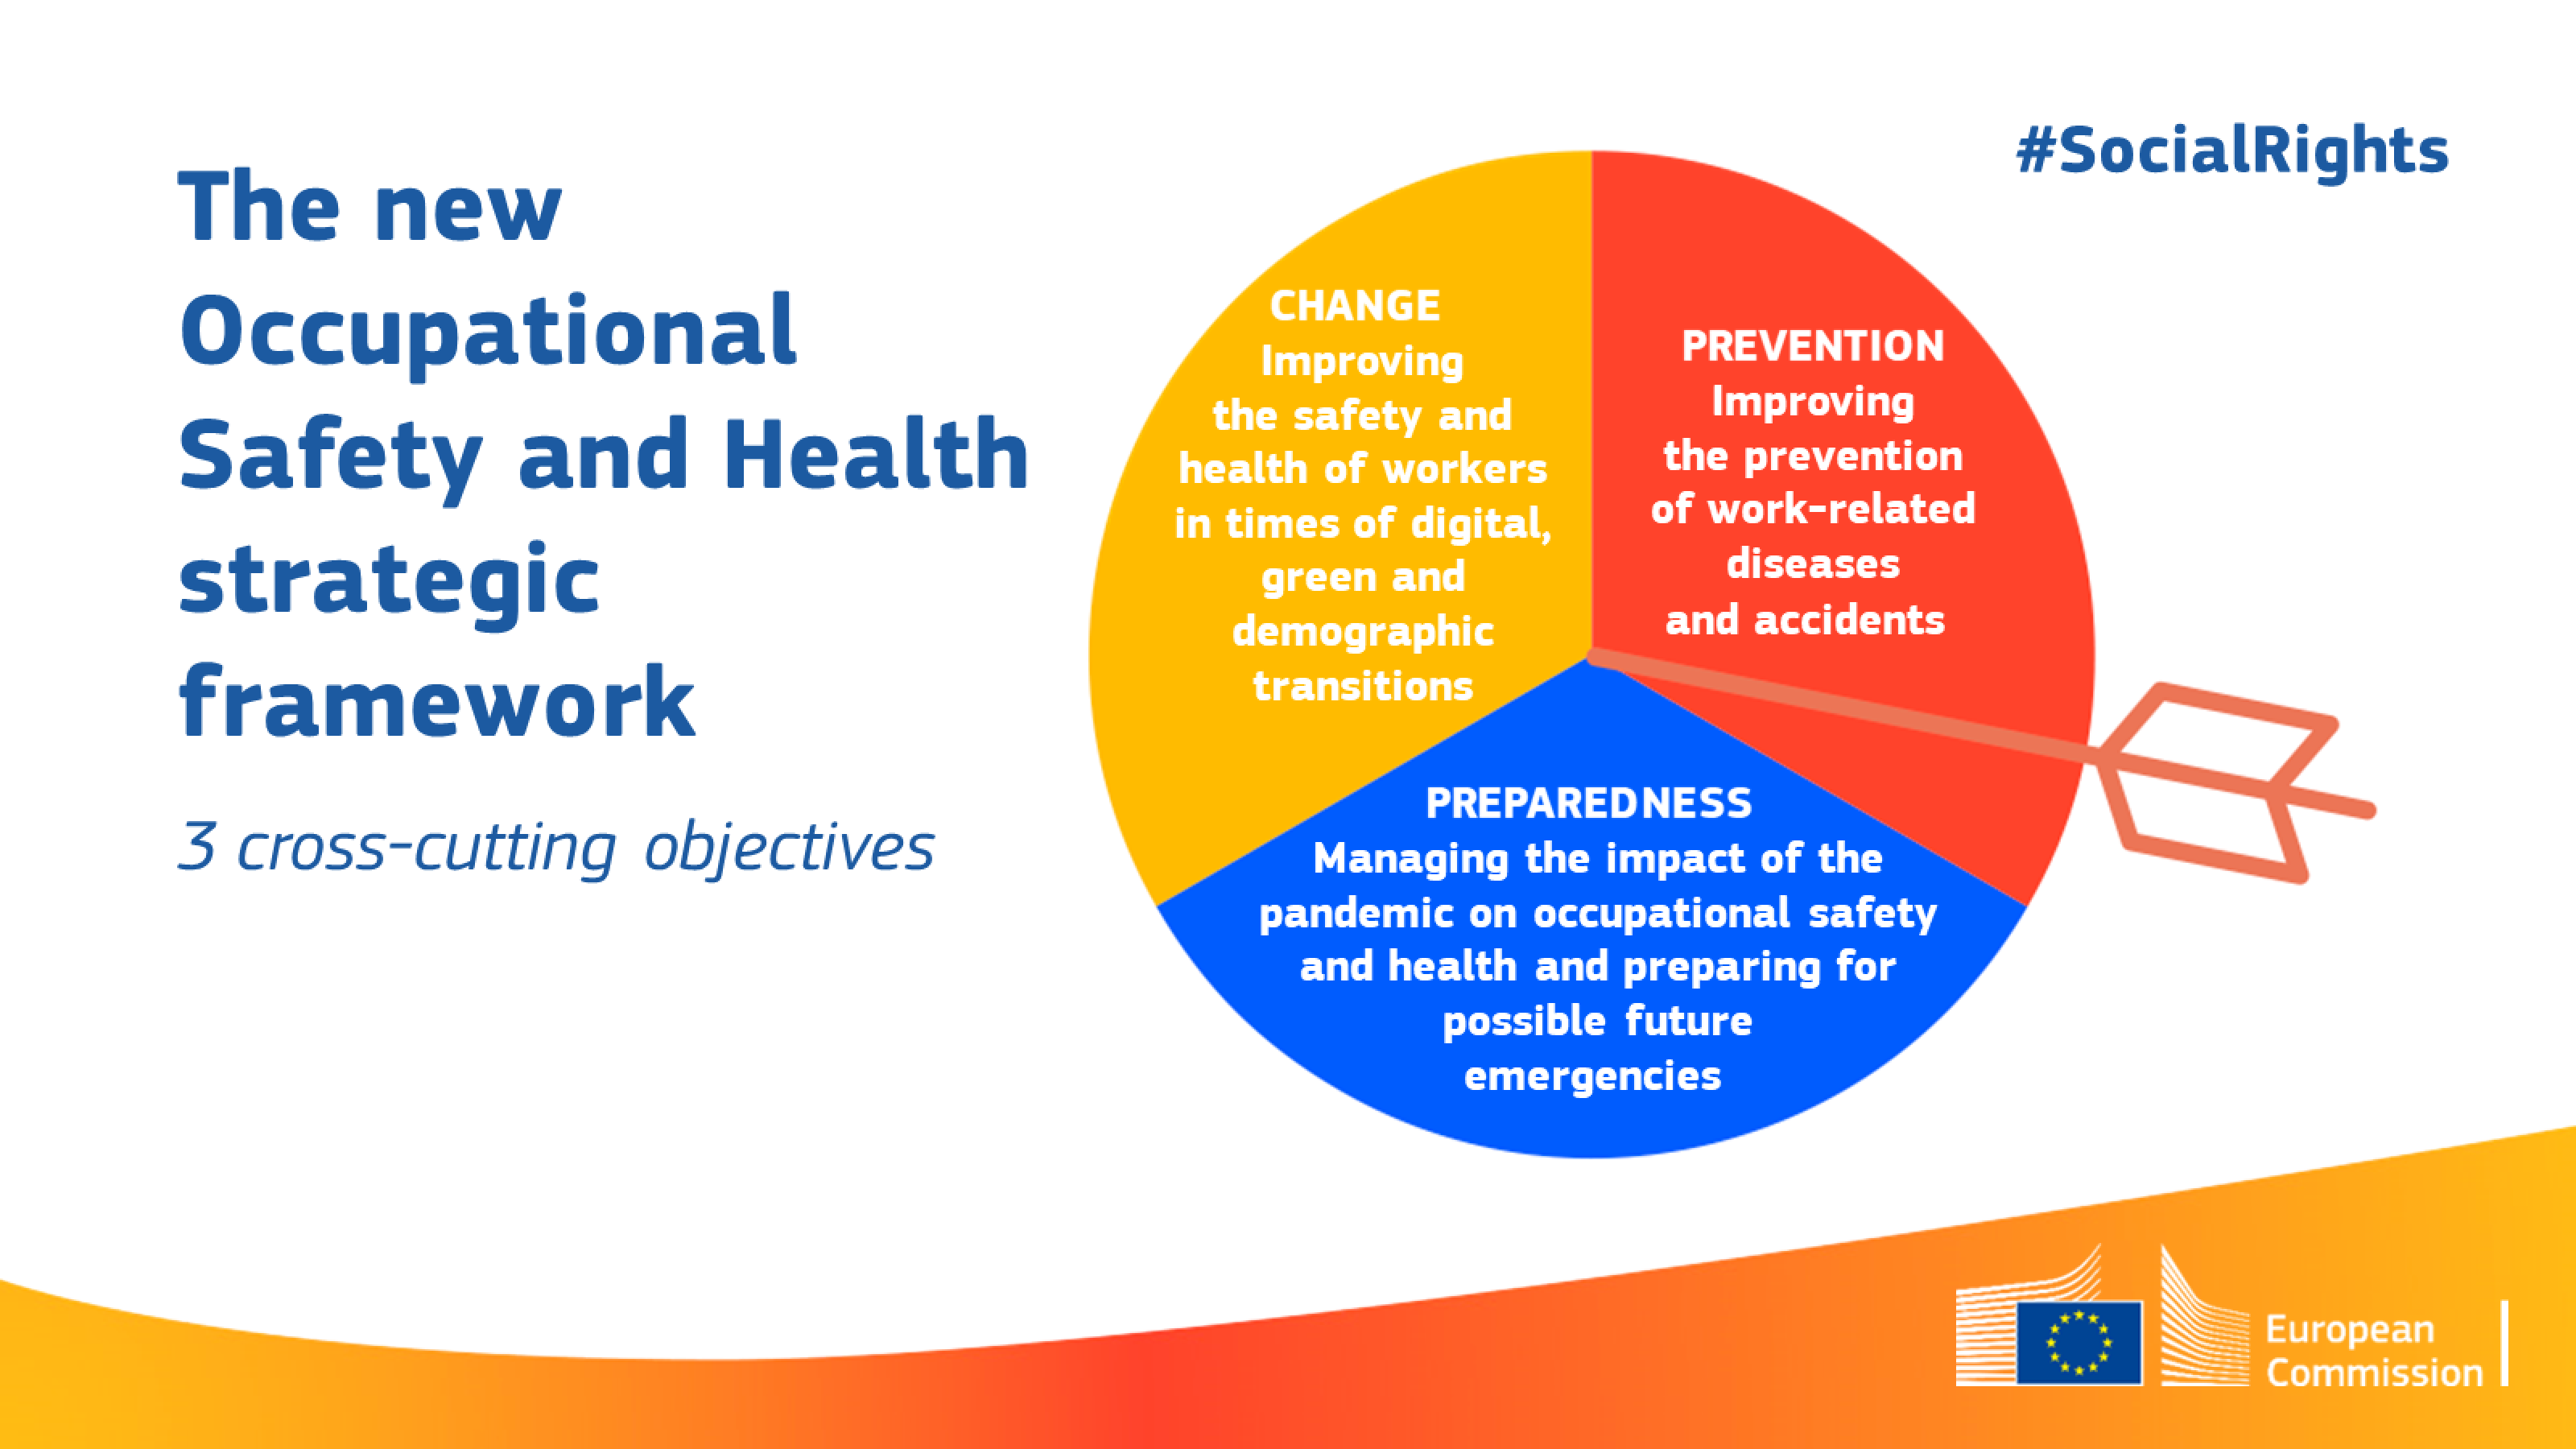 The new occupational health and safety strategic framework  Text saying:  #SocialRights